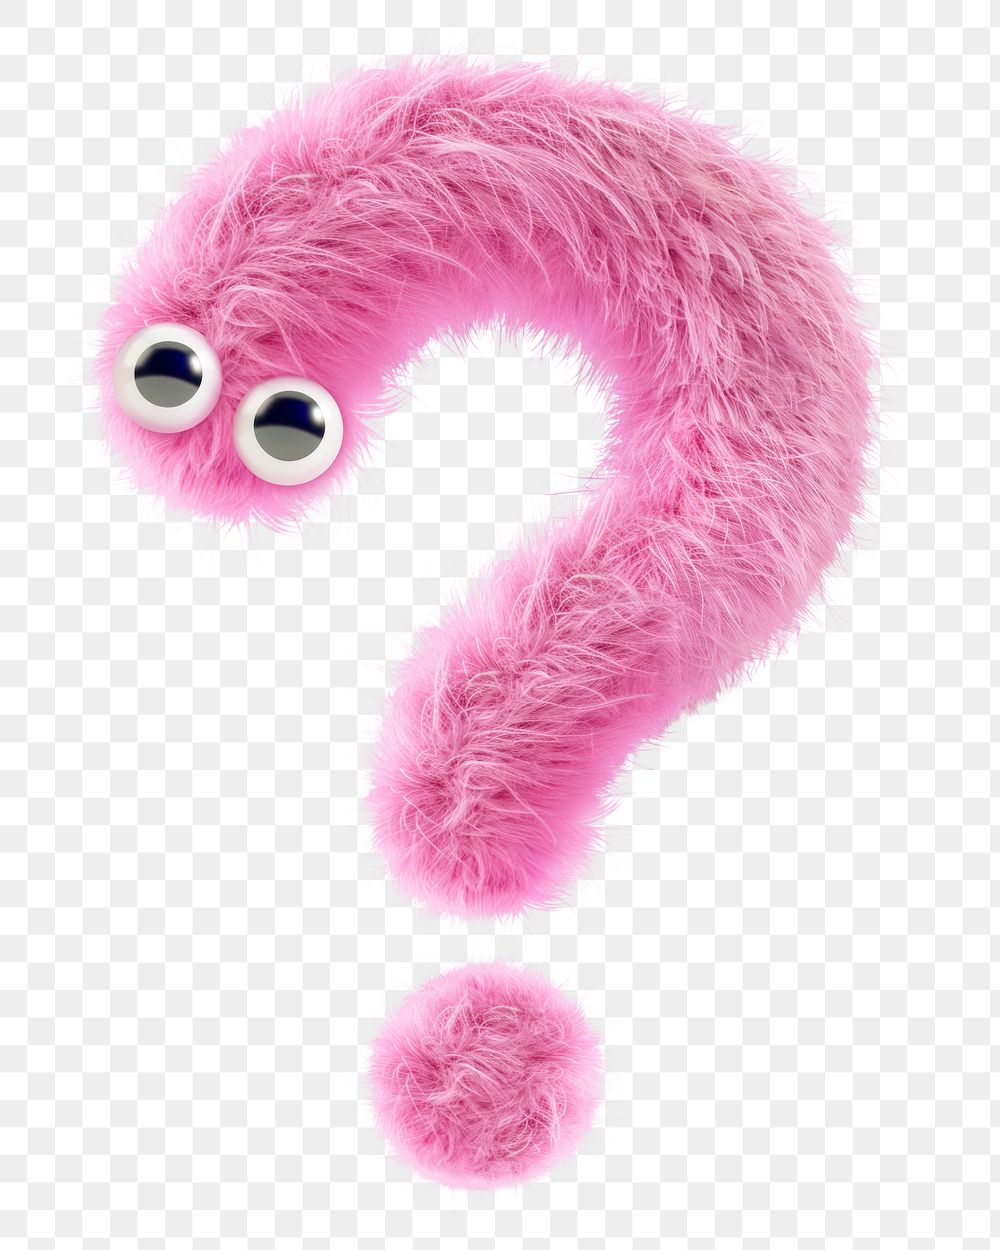 Question mark sign png character, transparent background